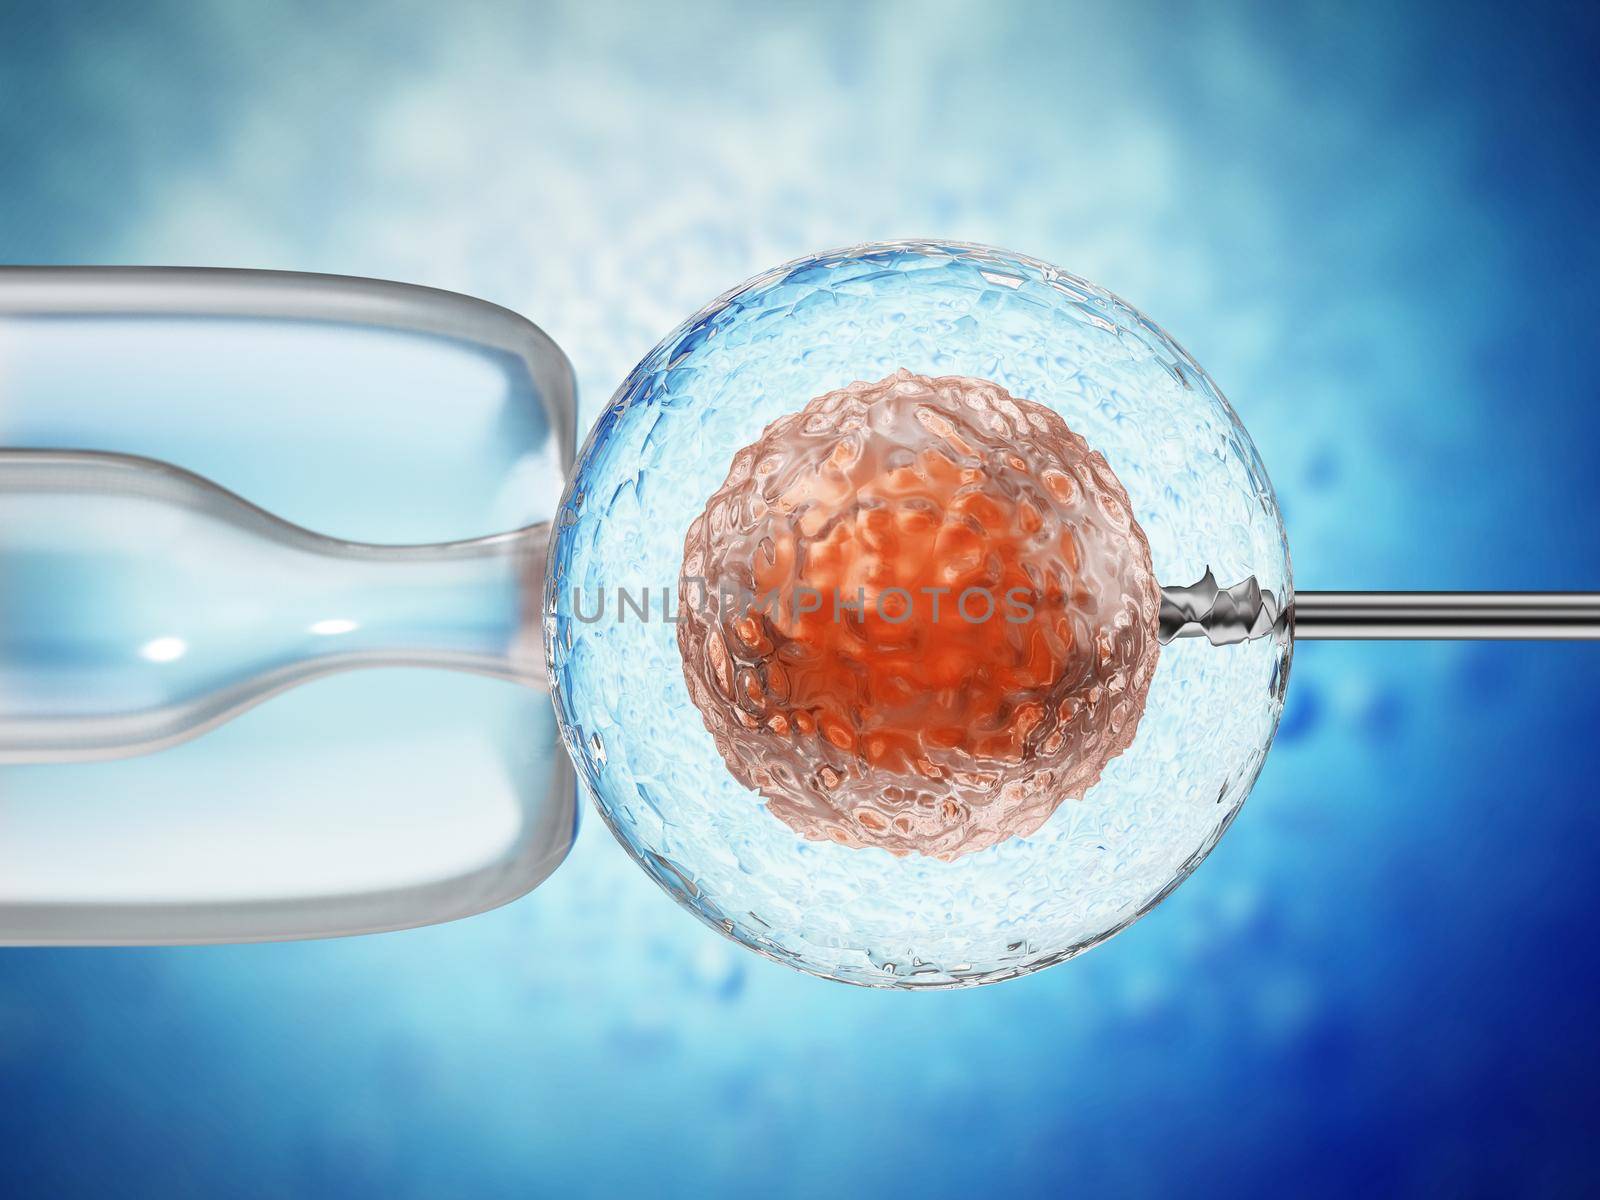 3D illustration of artificial insemination process showings sperms being injected inside the ovule. 3D illustration.